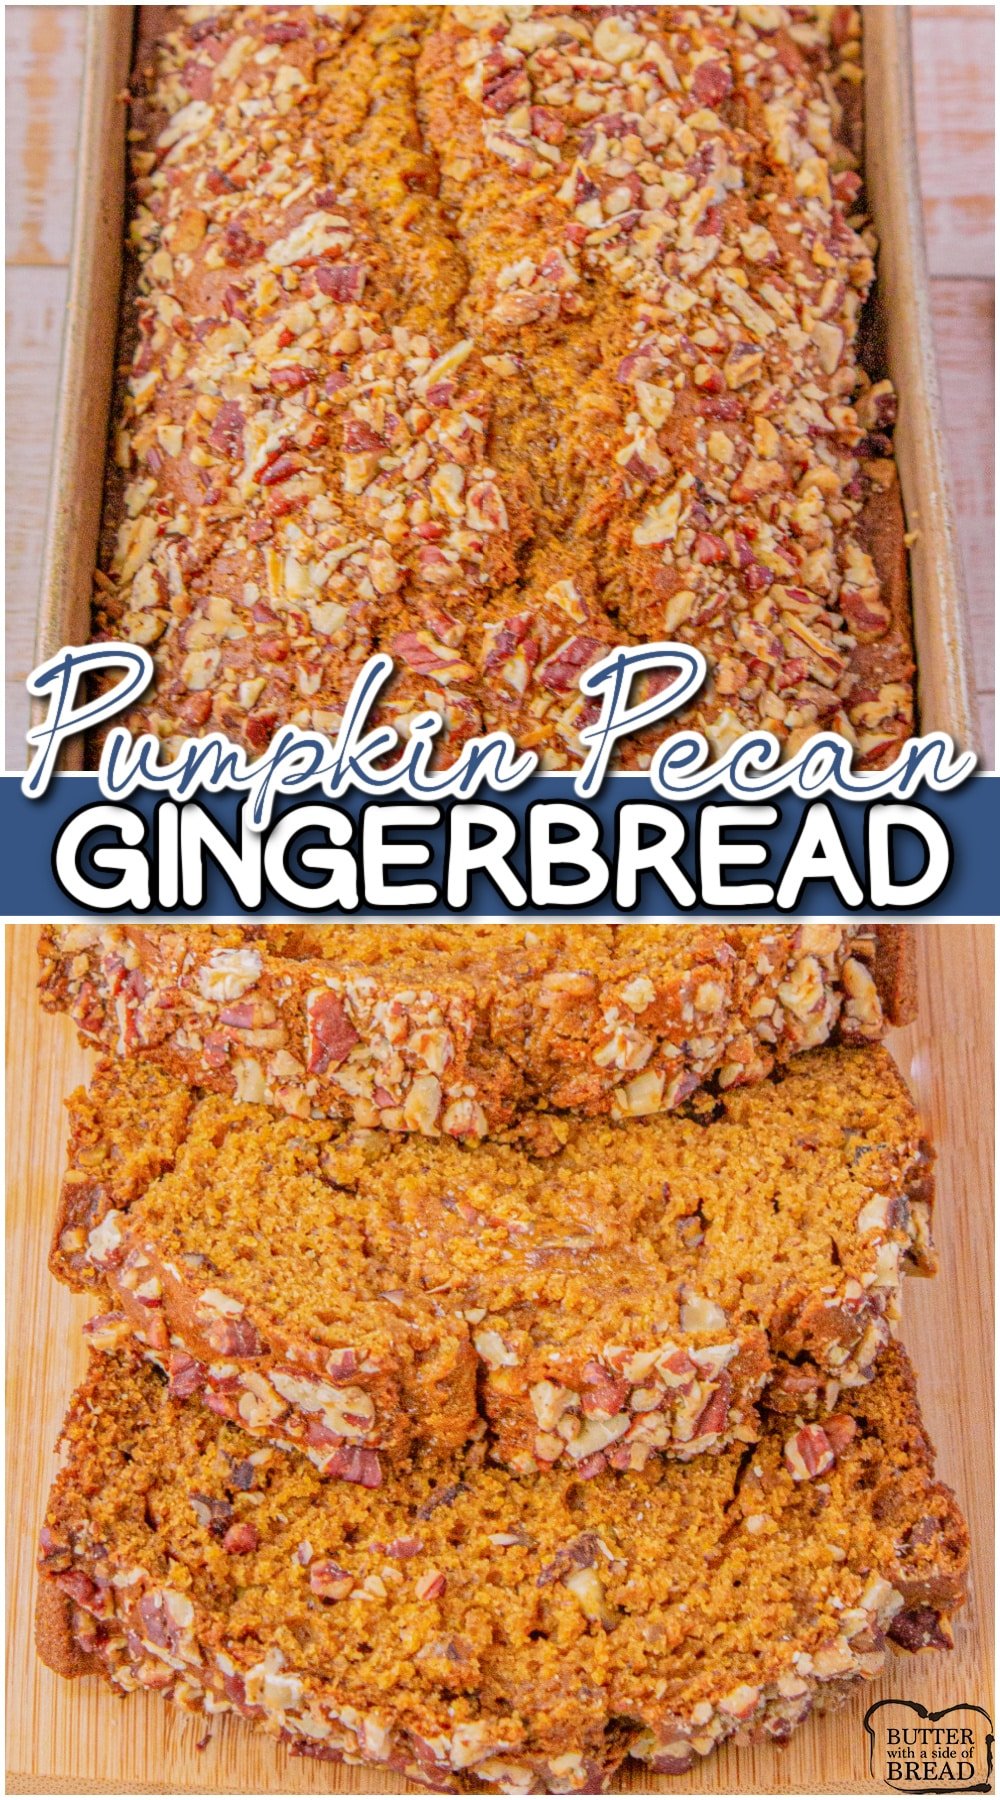 Pumpkin Gingerbread made from scratch & bursting with fabulous Fall flavors! This pumpkin gingerbread loaf is soft & moist, has warm spices and bright pumpkin flavor.